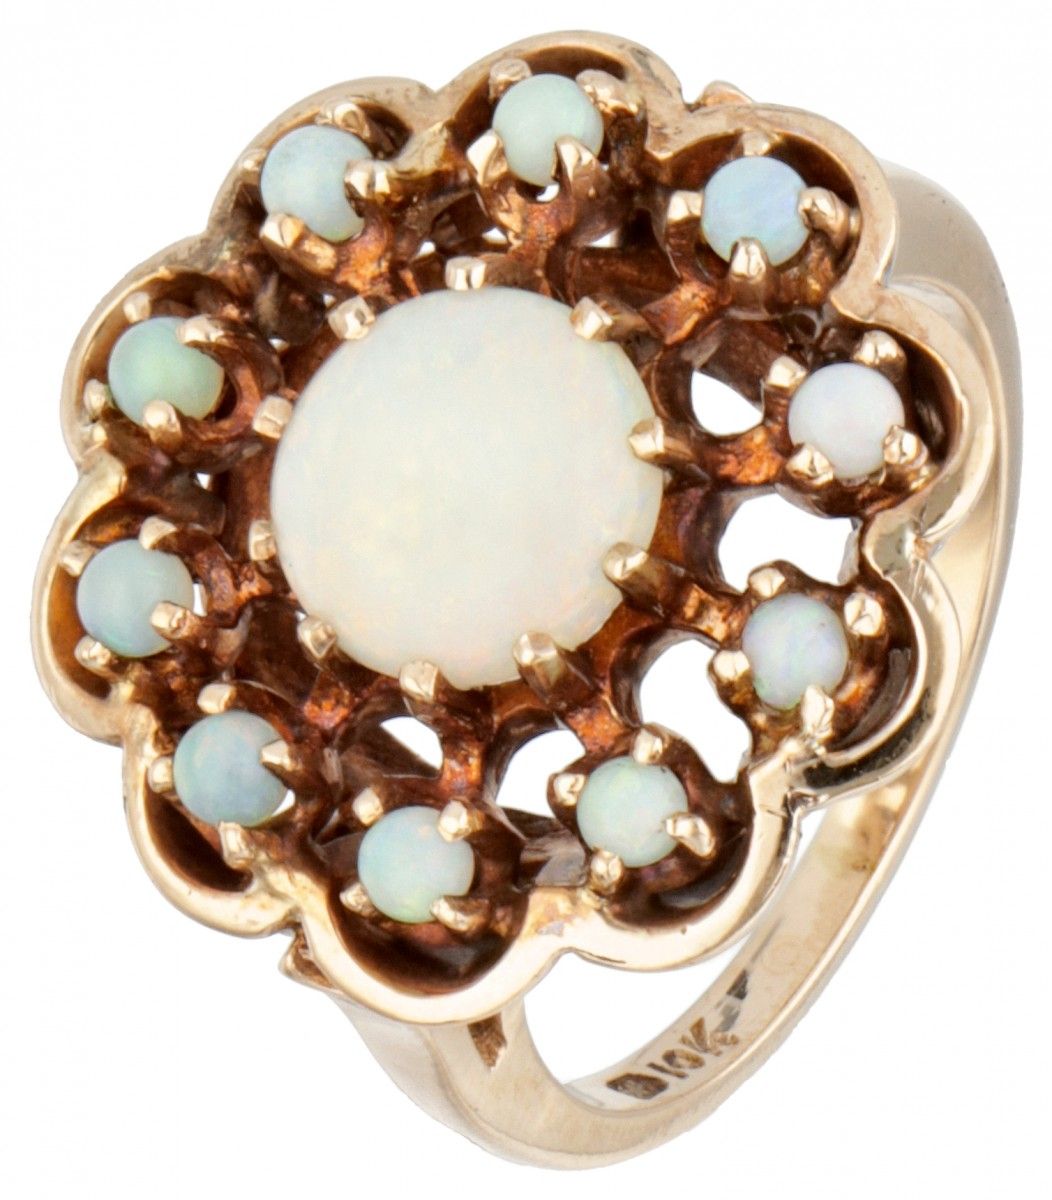 BLA 10K. Rose gold rosette ring set with approx. 1.65 ct. Precious opal. 印记：星星，1&hellip;